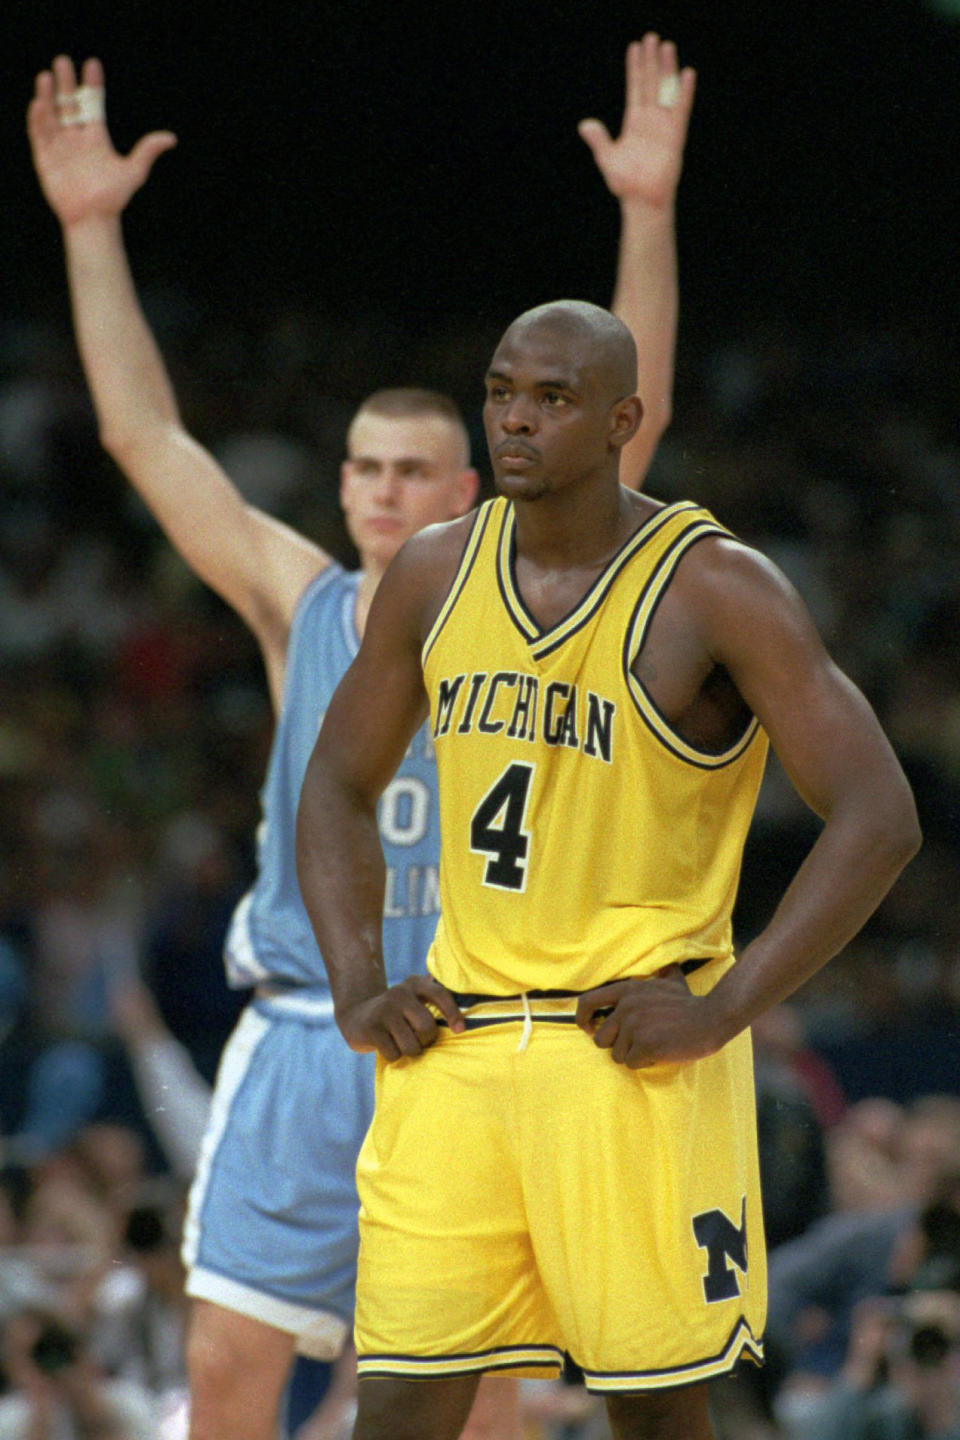 FILE - In this April 5, 1993, file photo, Michigan's Chris Webber (4) stands by as North Carolina's Eric Montross celebrates during North Carolina's technical foul shots in the final seconds of the NCAA Final Four championship game at the Superdome in New Orleans. Webber called a time out Michigan did not have, and Michigan was charged with a technical foul and lost possession of the ball. Donald Williams made all four free throws and North Carolina won the national title 77-71. (AP Photo/Susan Ragan, File)